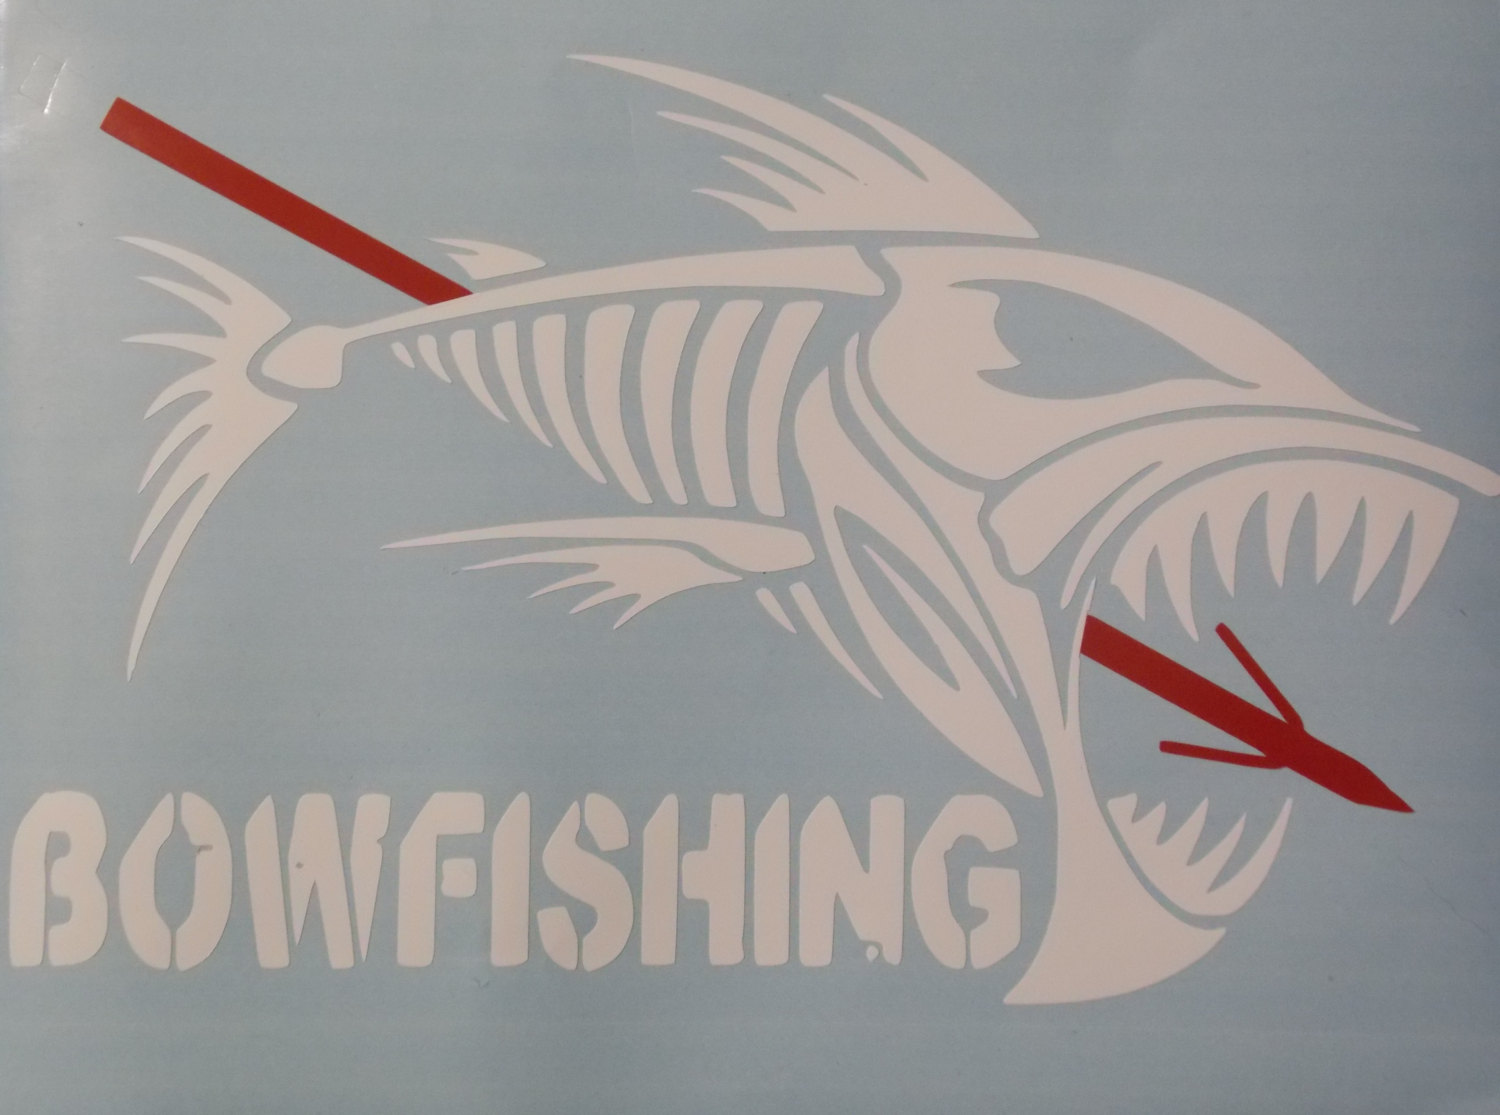 BowFishing Decal by BoardProducts on Etsy. helpful non helpful. etsy.com. 